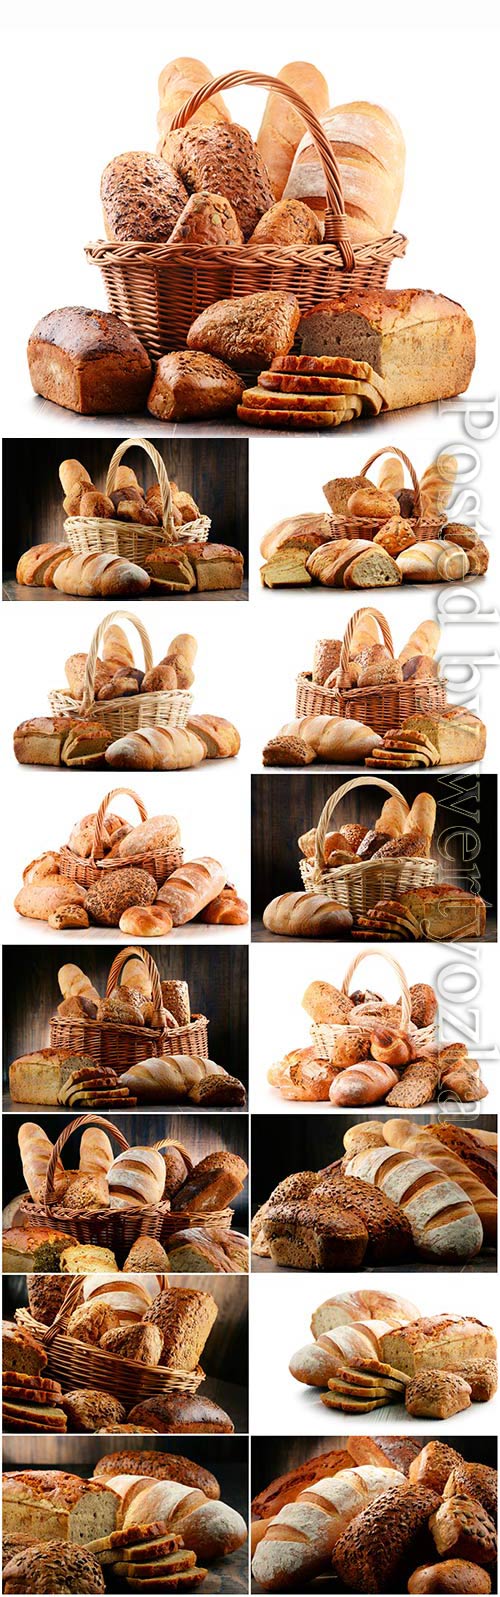 Baskets with freshly baked bread stock photo